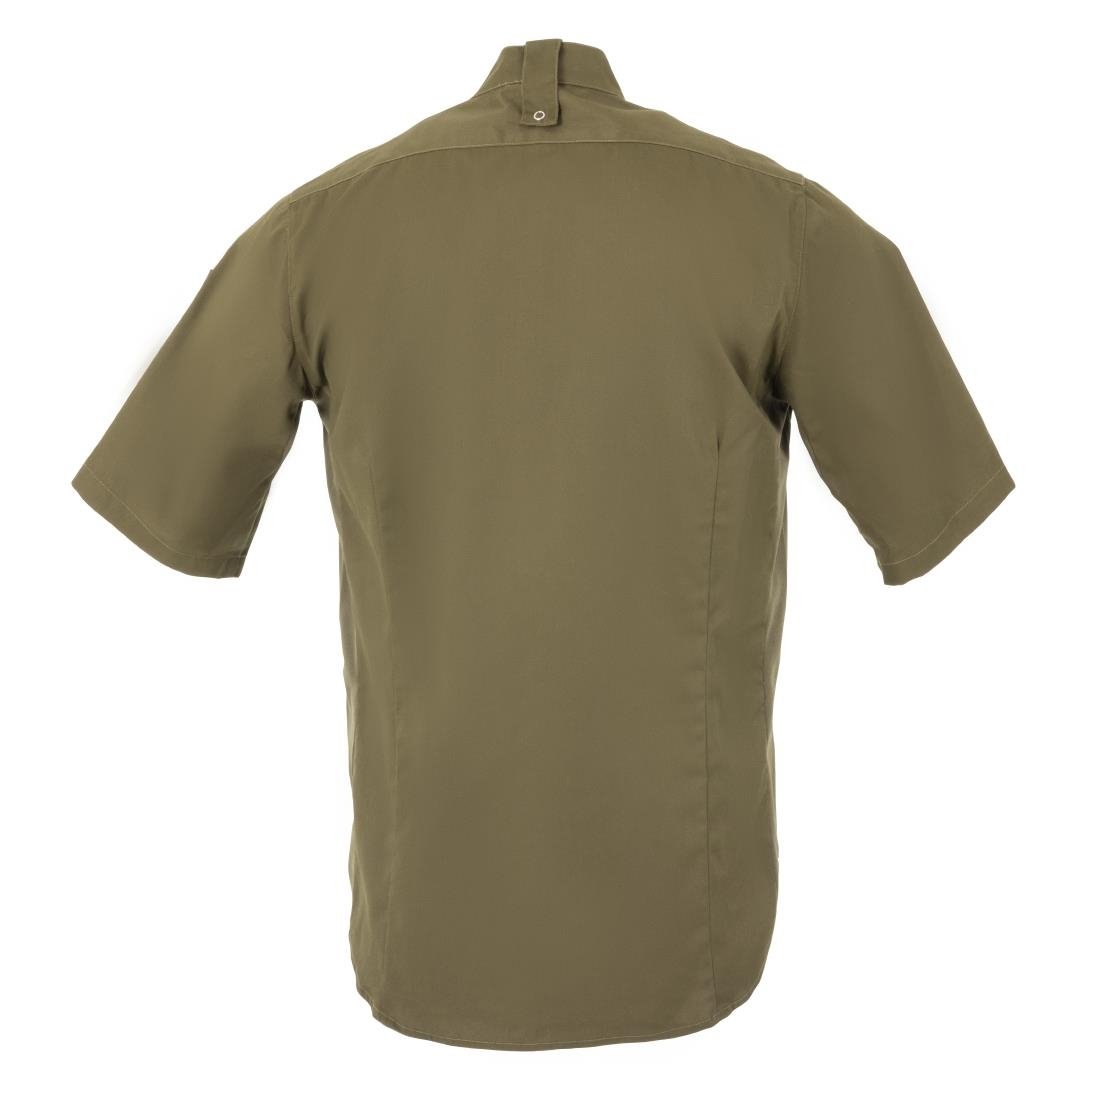 BA001-S Southside Band Collar Chef Jacket Khaki Size S JD Catering Equipment Solutions Ltd